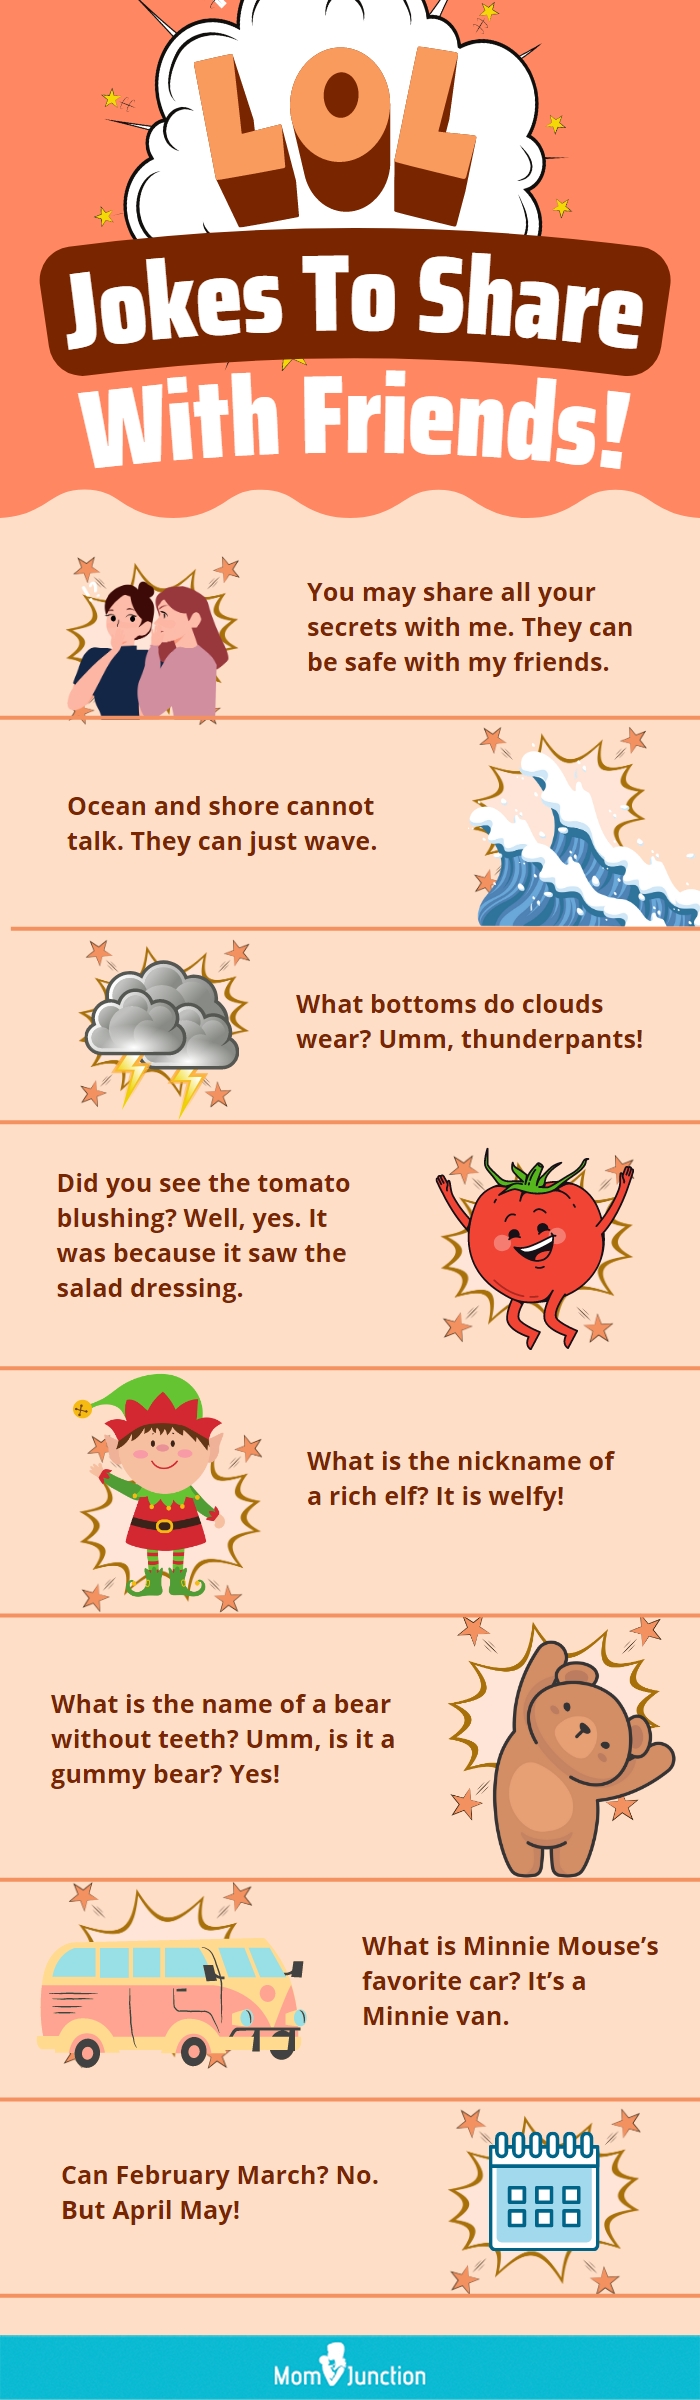 funniest jokes to tell friends [infographic]